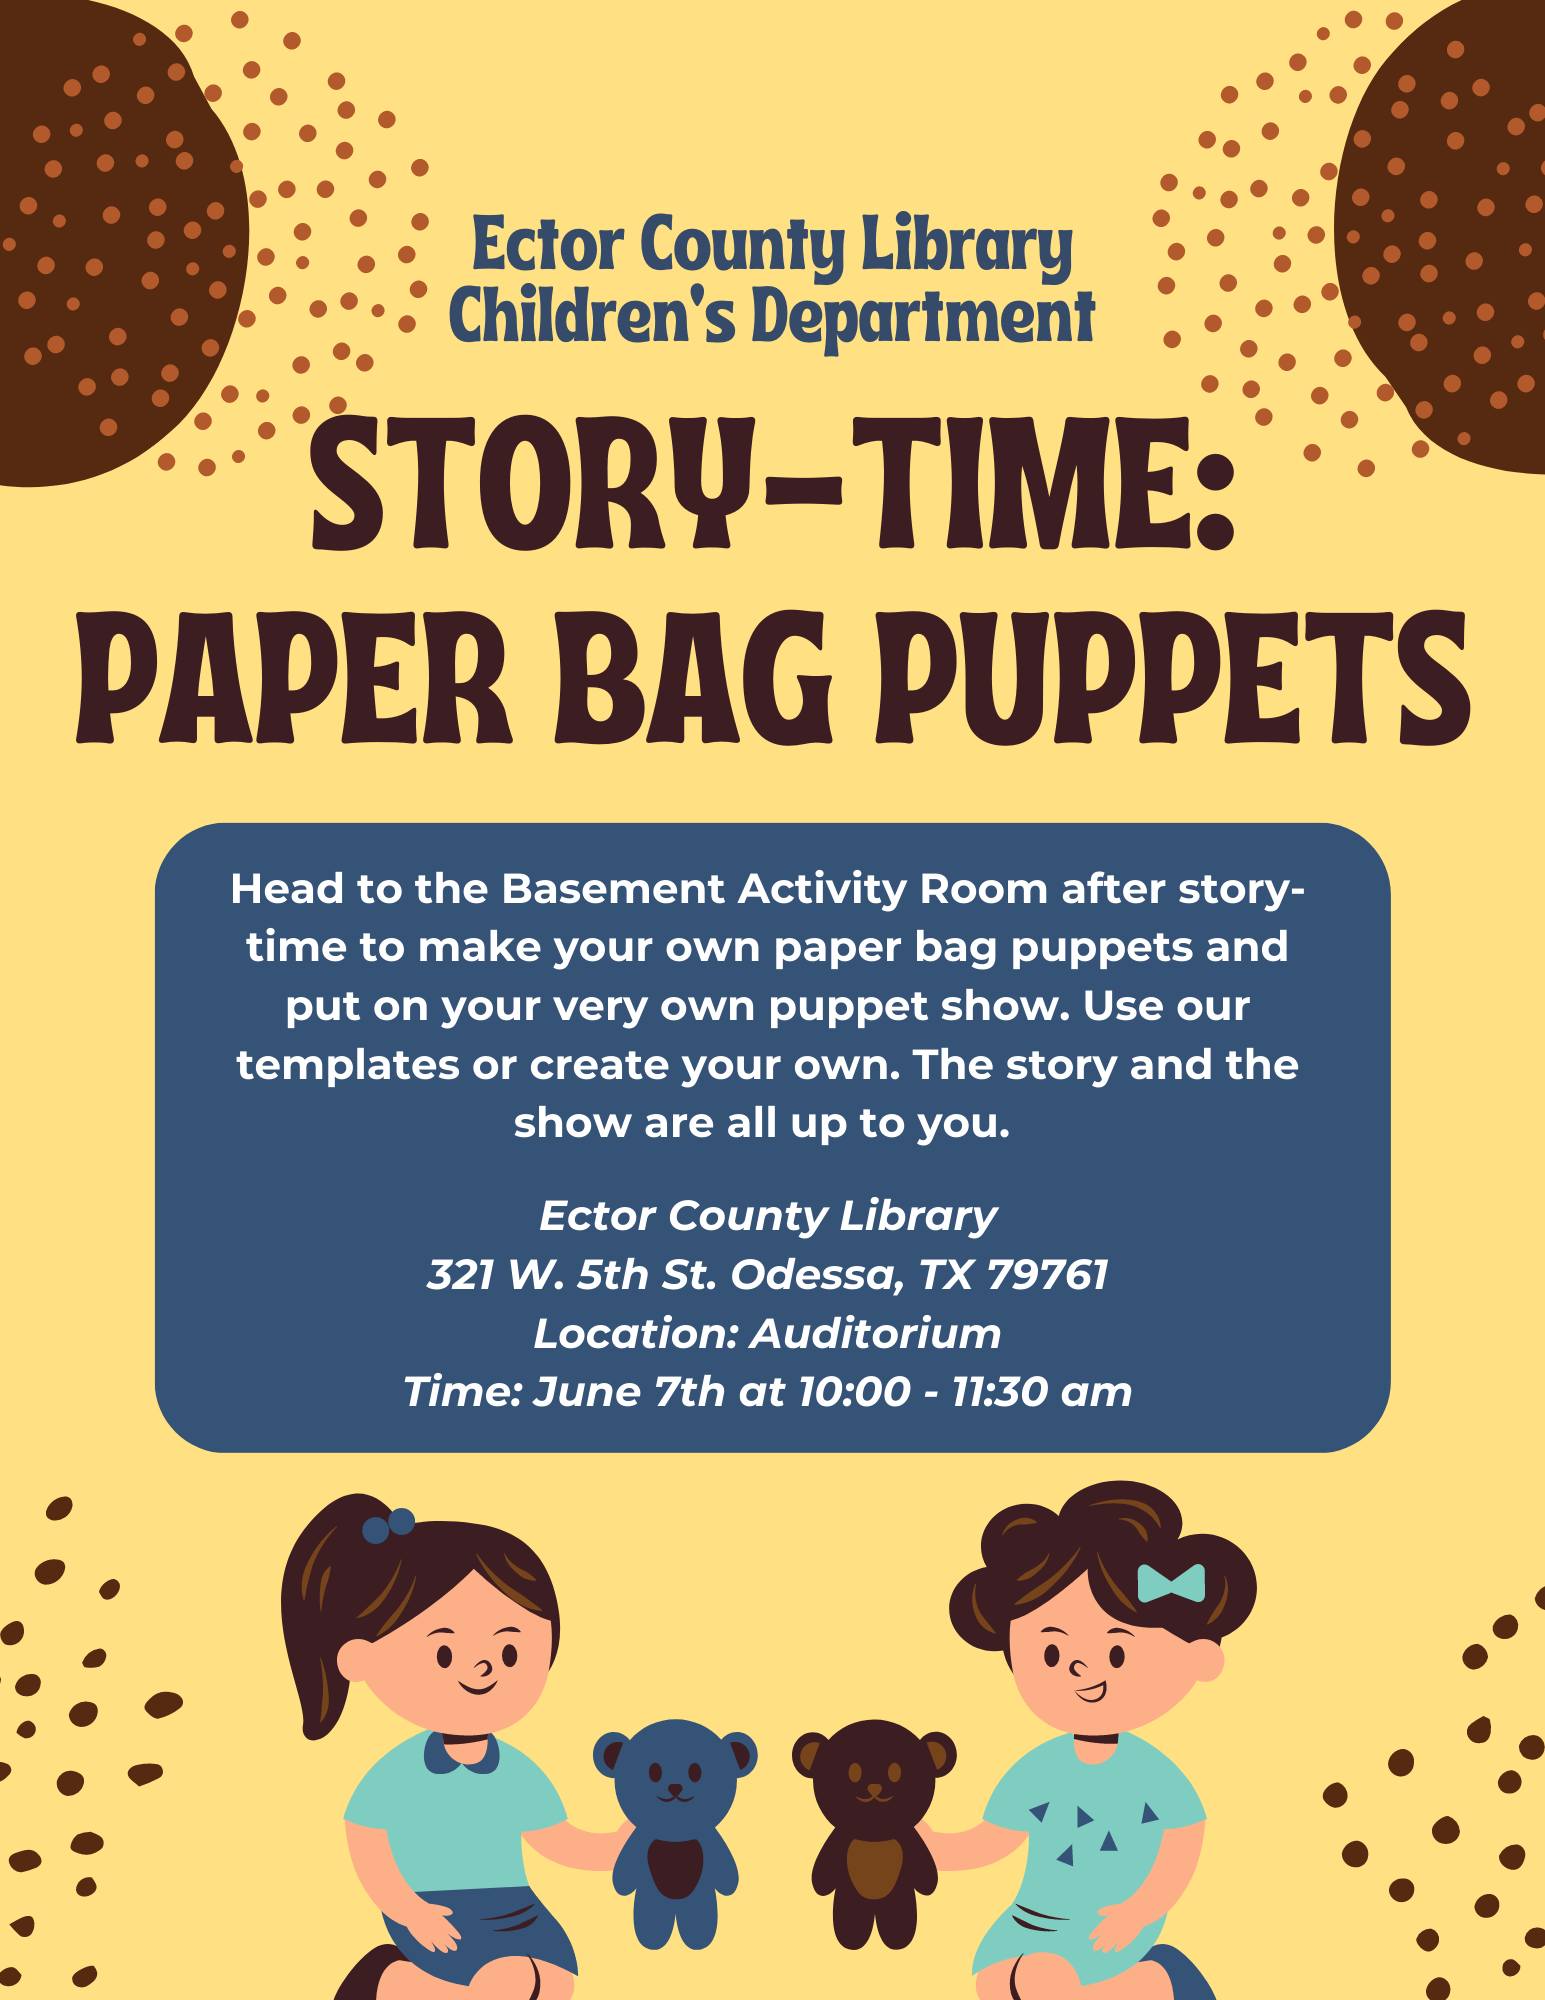 Ector County Library Host Story Time